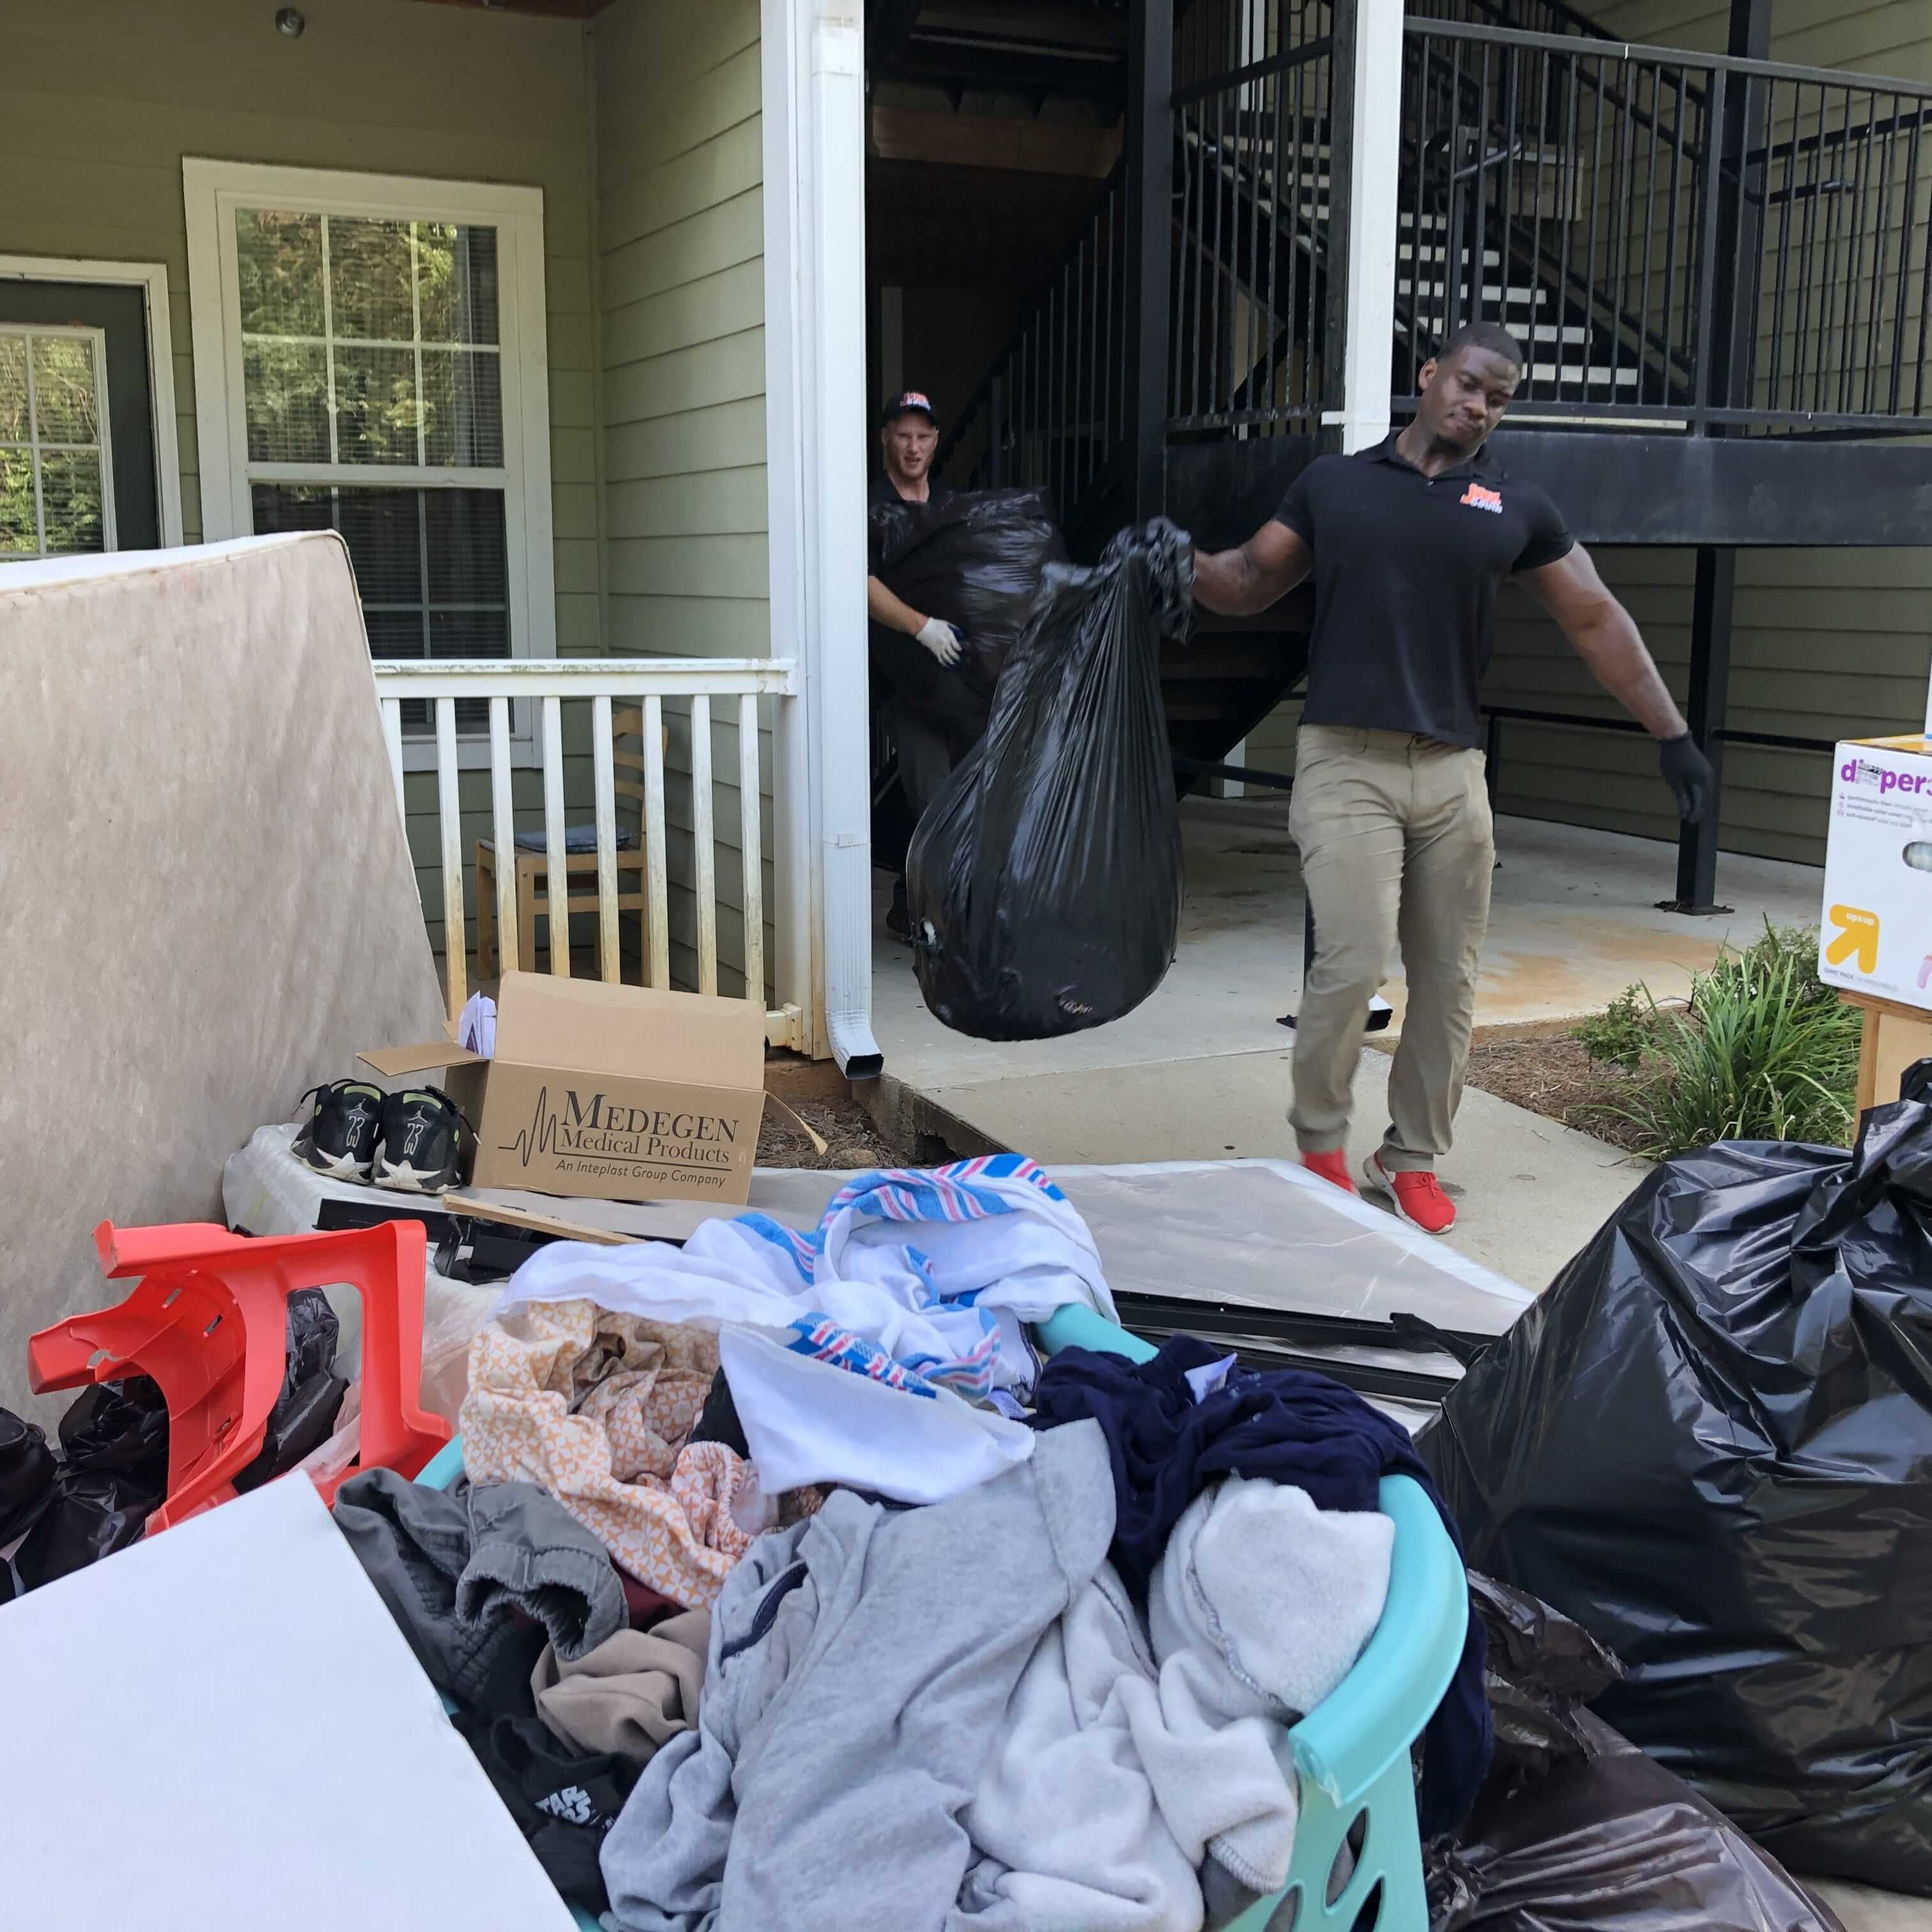 Junk South removes furniture at apartment eviction